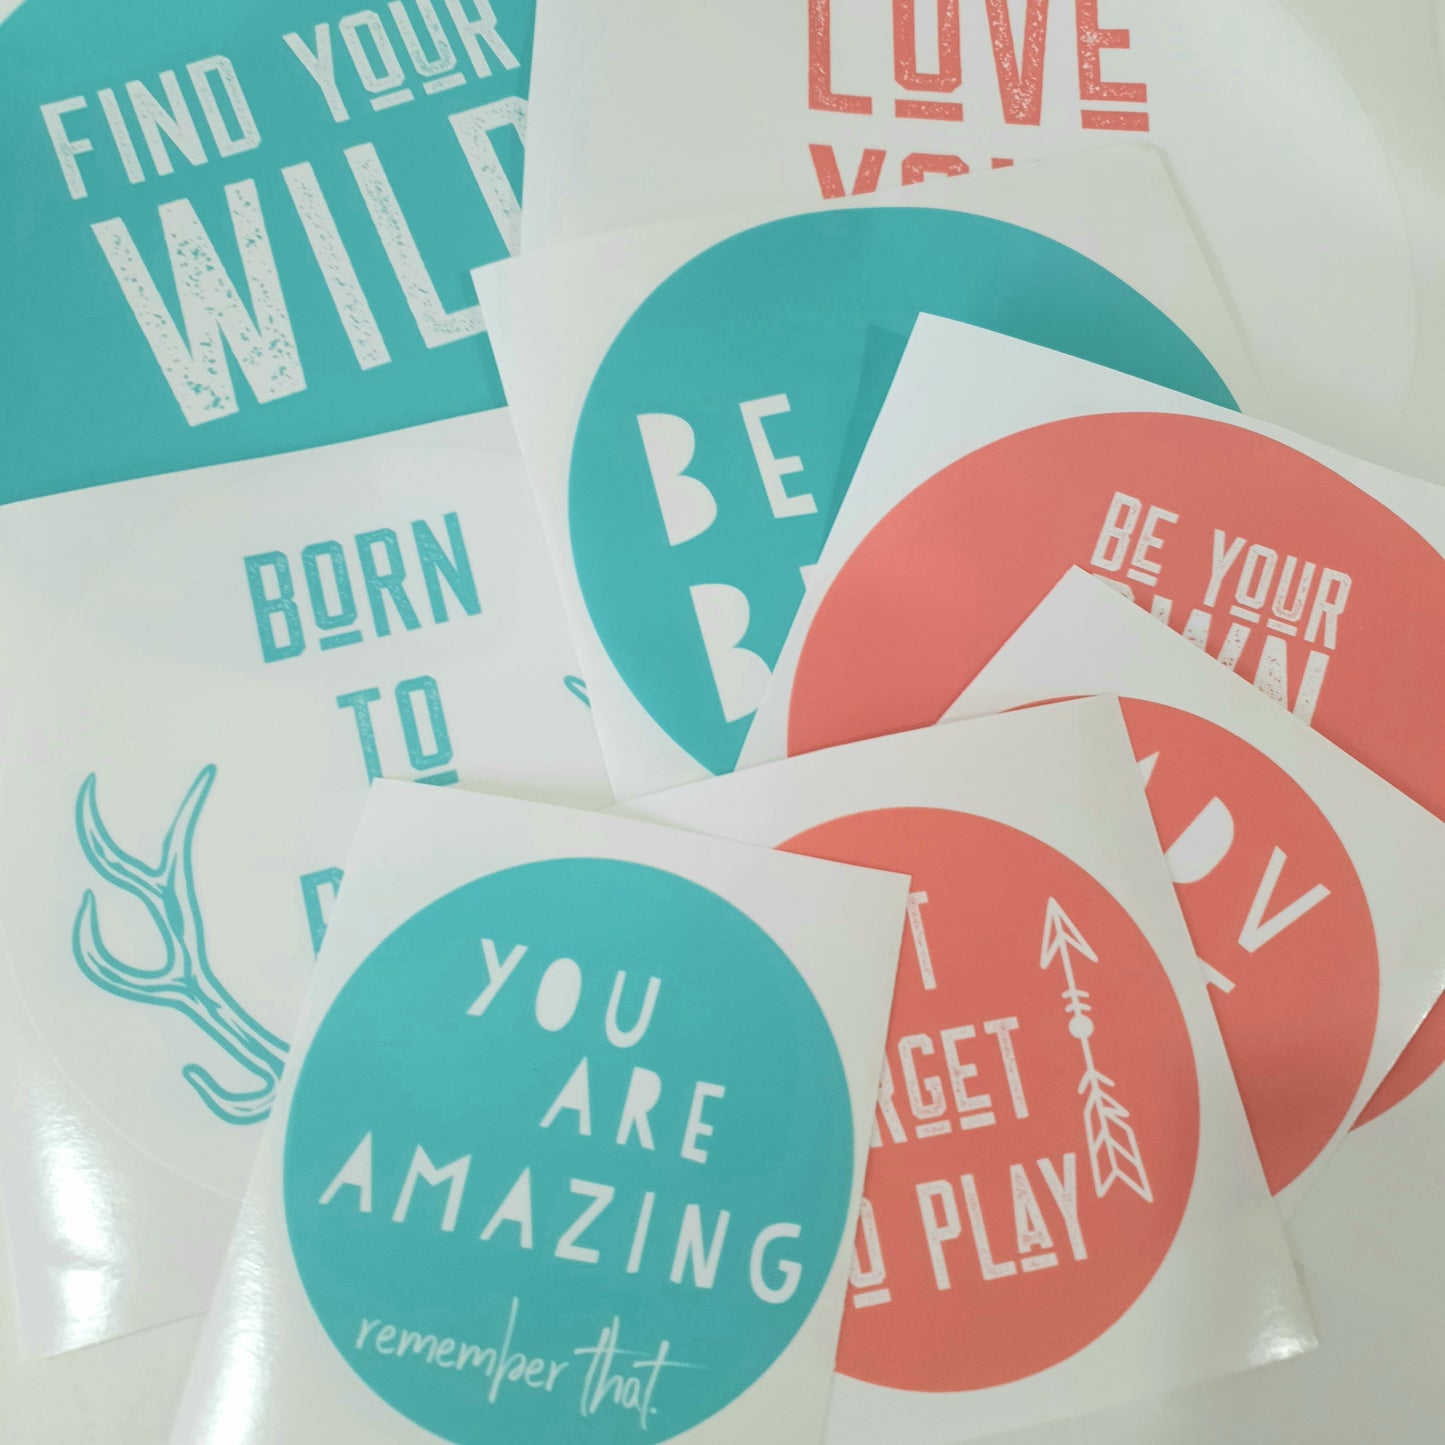 Motivational Wall Decals - Find your Wild